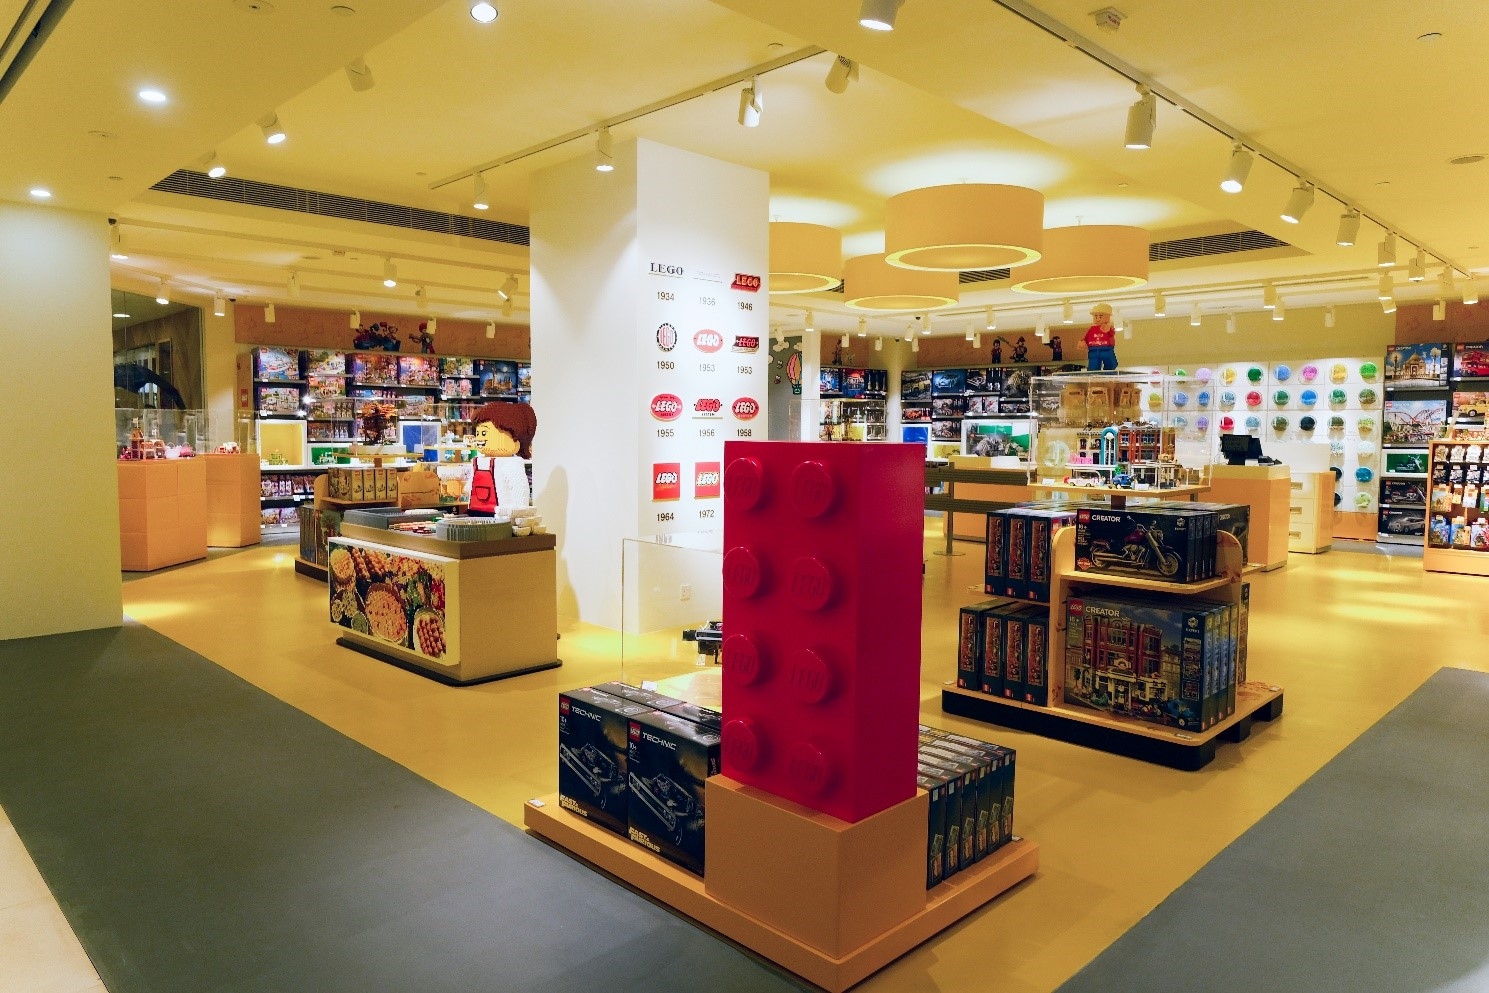 Photo: Amid the Covid-19 outbreak, Hong Kong welcomes a new LEGO shop.